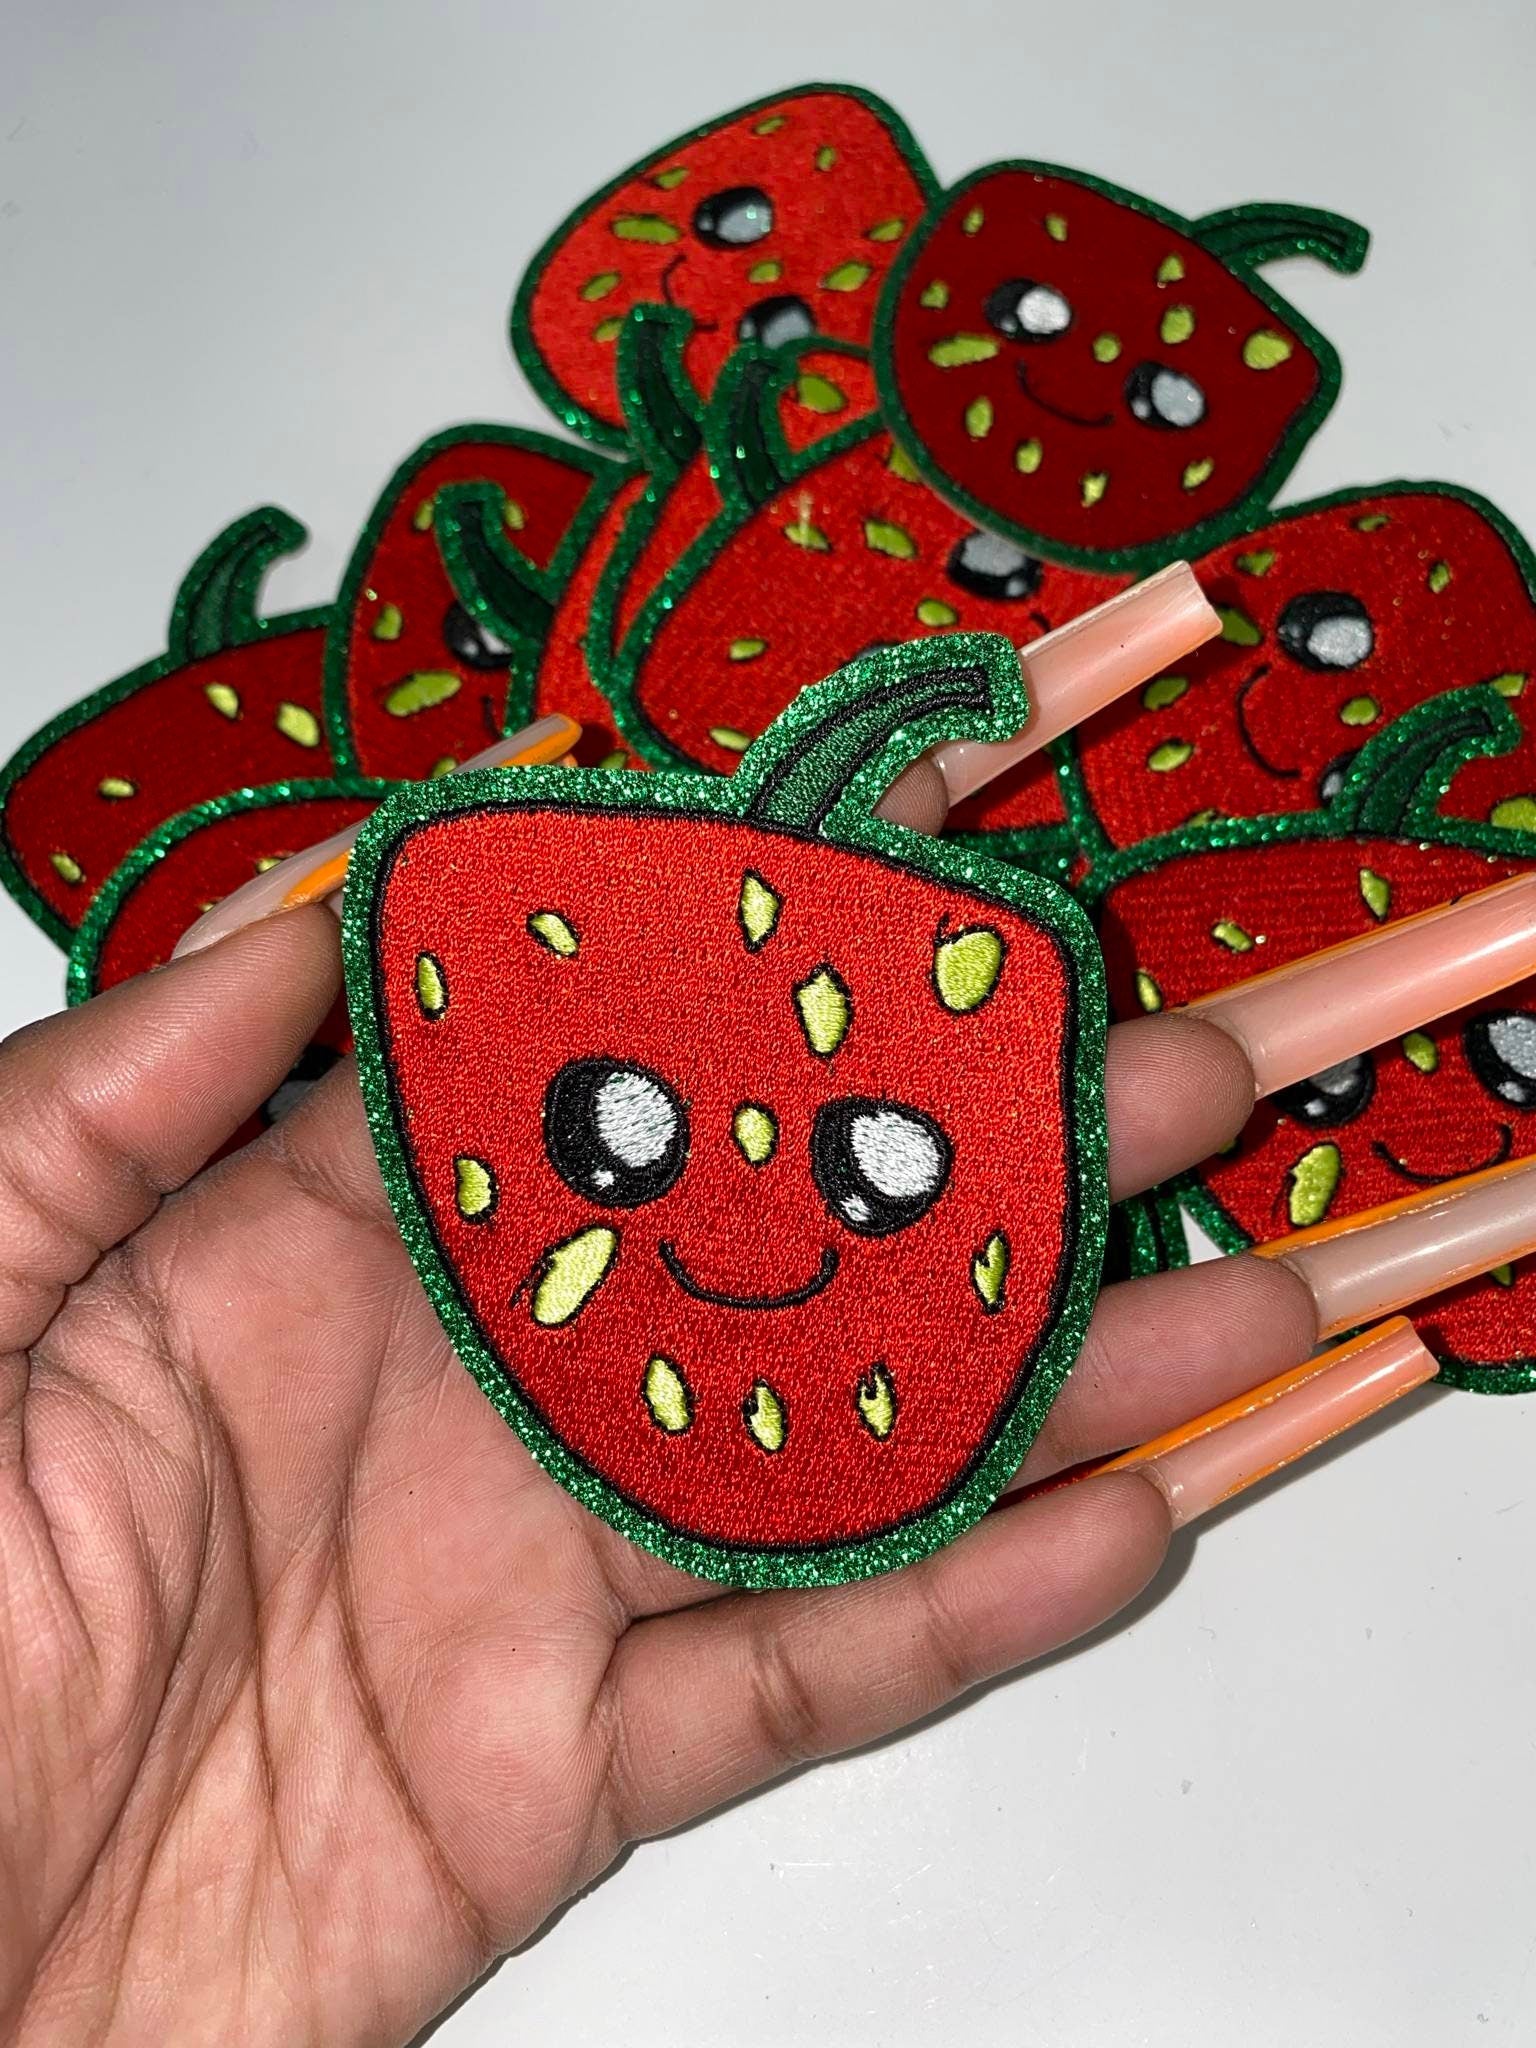 NEW, Adorable 1-pc "Strawberry" Patch w/Green GLITTER, Cute Patch for Girls, iron-on Patch for Denim & Crocs Patch for Little Girls, Size 3"